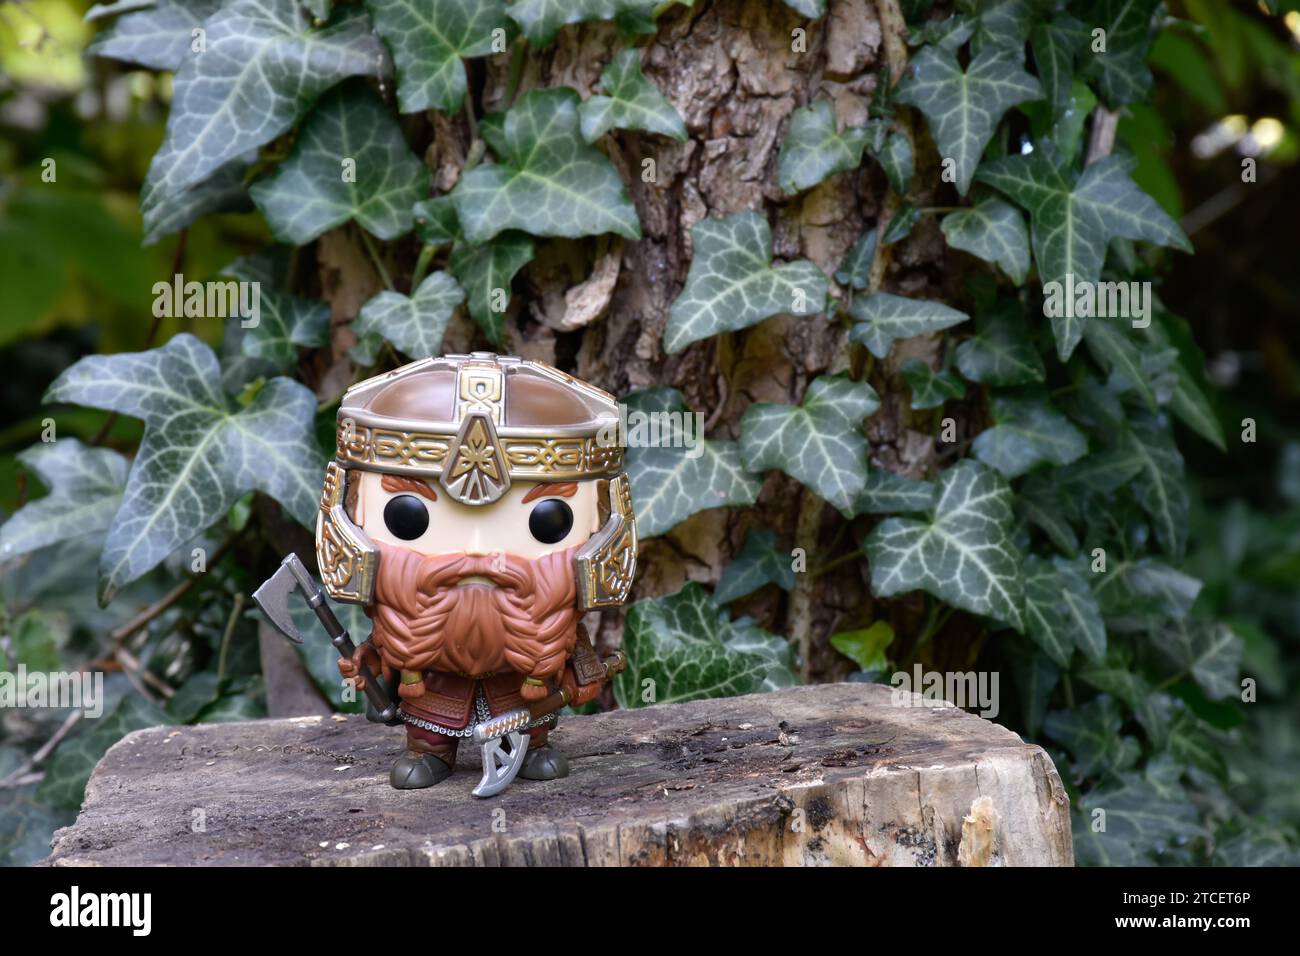 Funko Pop action figure of dwarf Gimli from fantasy movie The Lord of the Rings. Warrior in armor with battle axe. Magic forest, green ivy leaves. Stock Photo